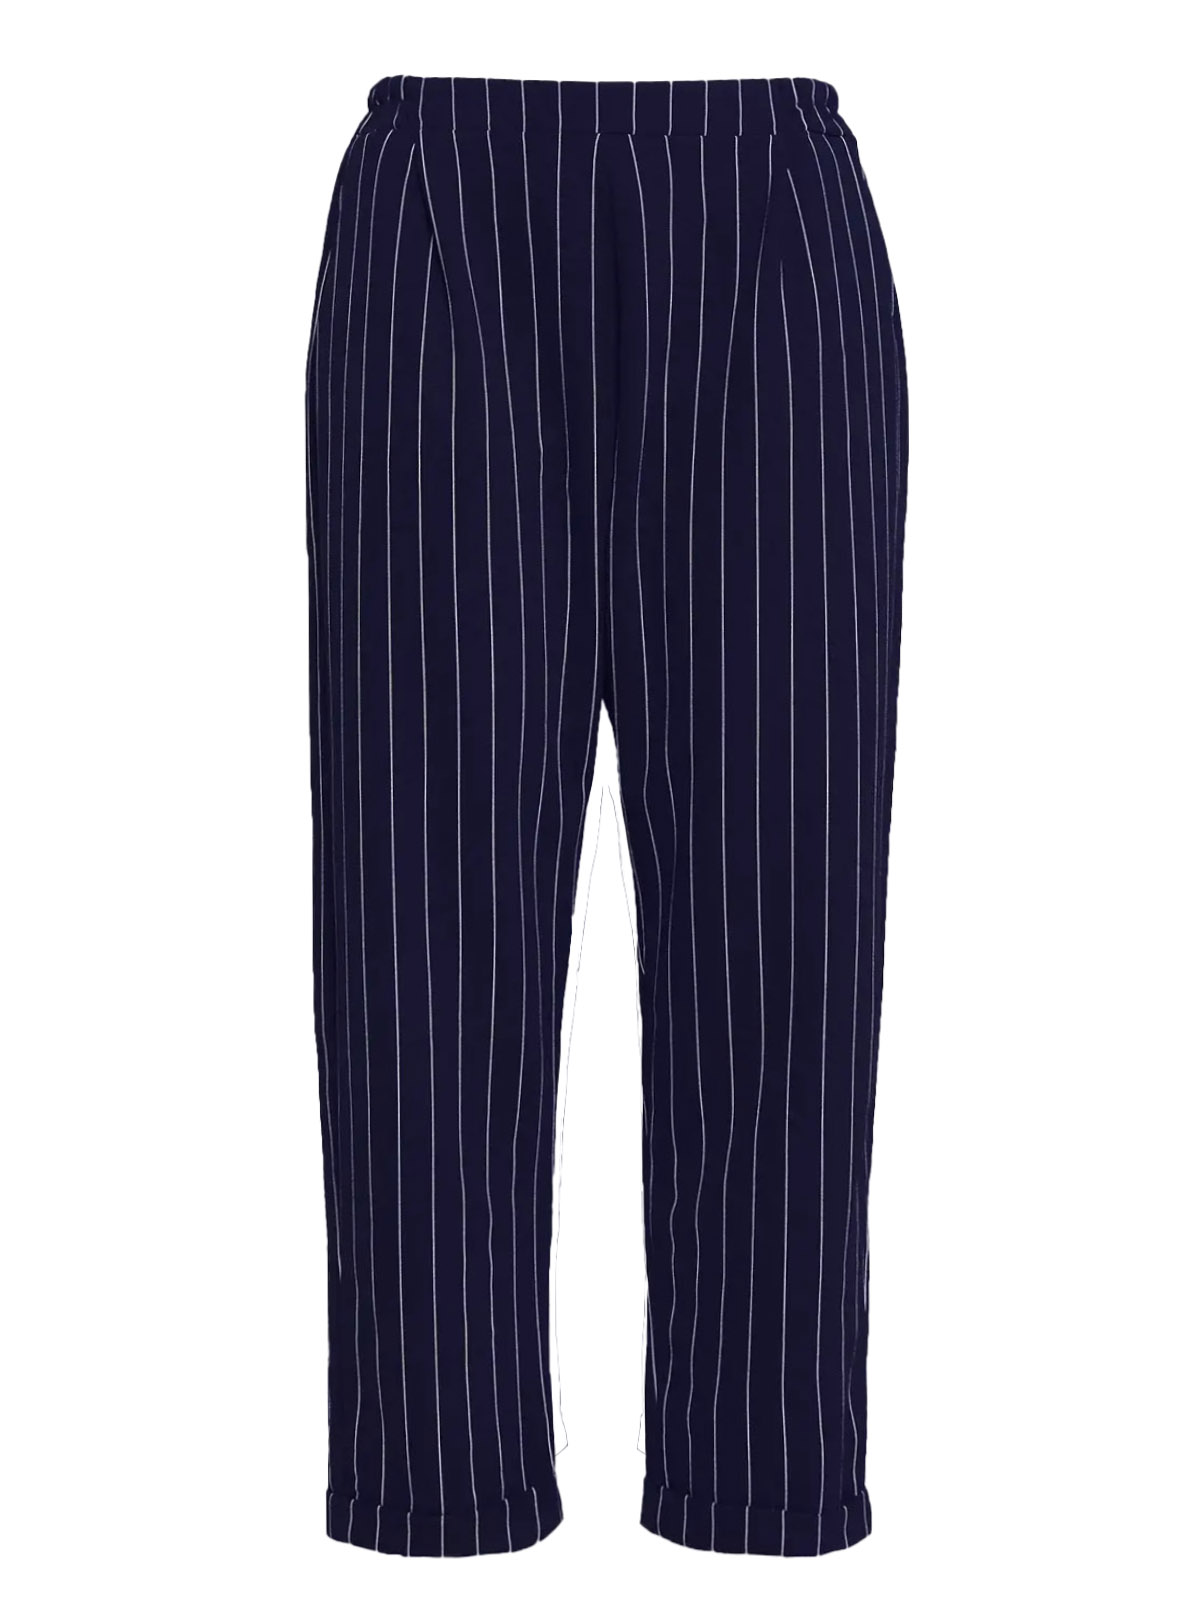 N3W L00K NAVY Pull On Striped Trousers - Plus Size 18 to 30